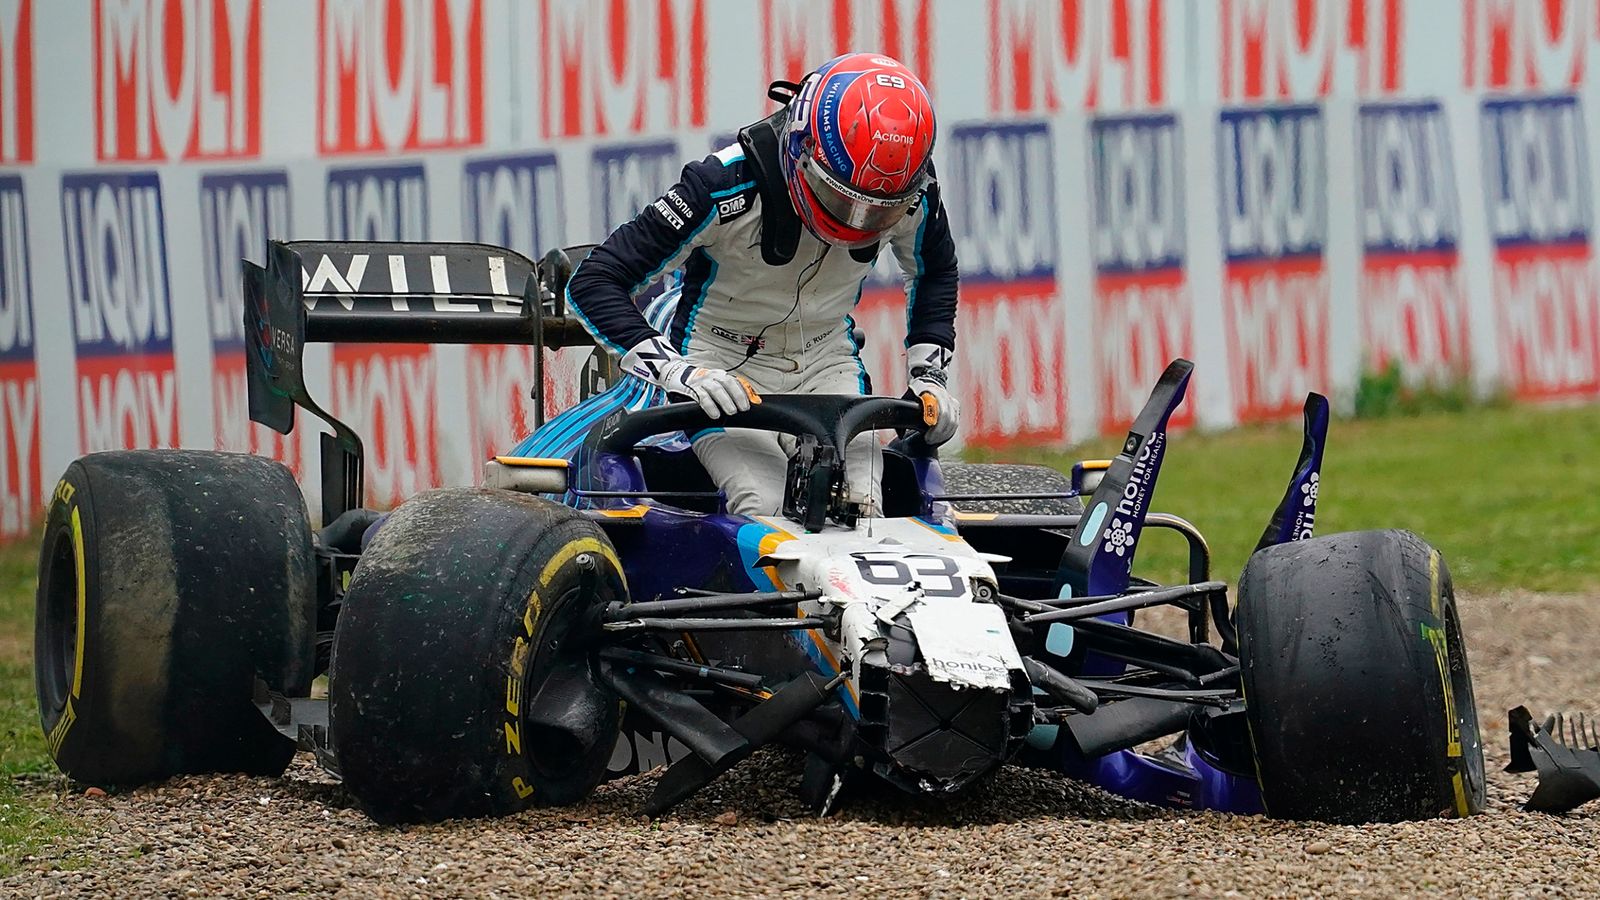 George Russell apologizes to Valtteri Bottas after the fall of GP Emilia Romagna: “It was not my proudest day”